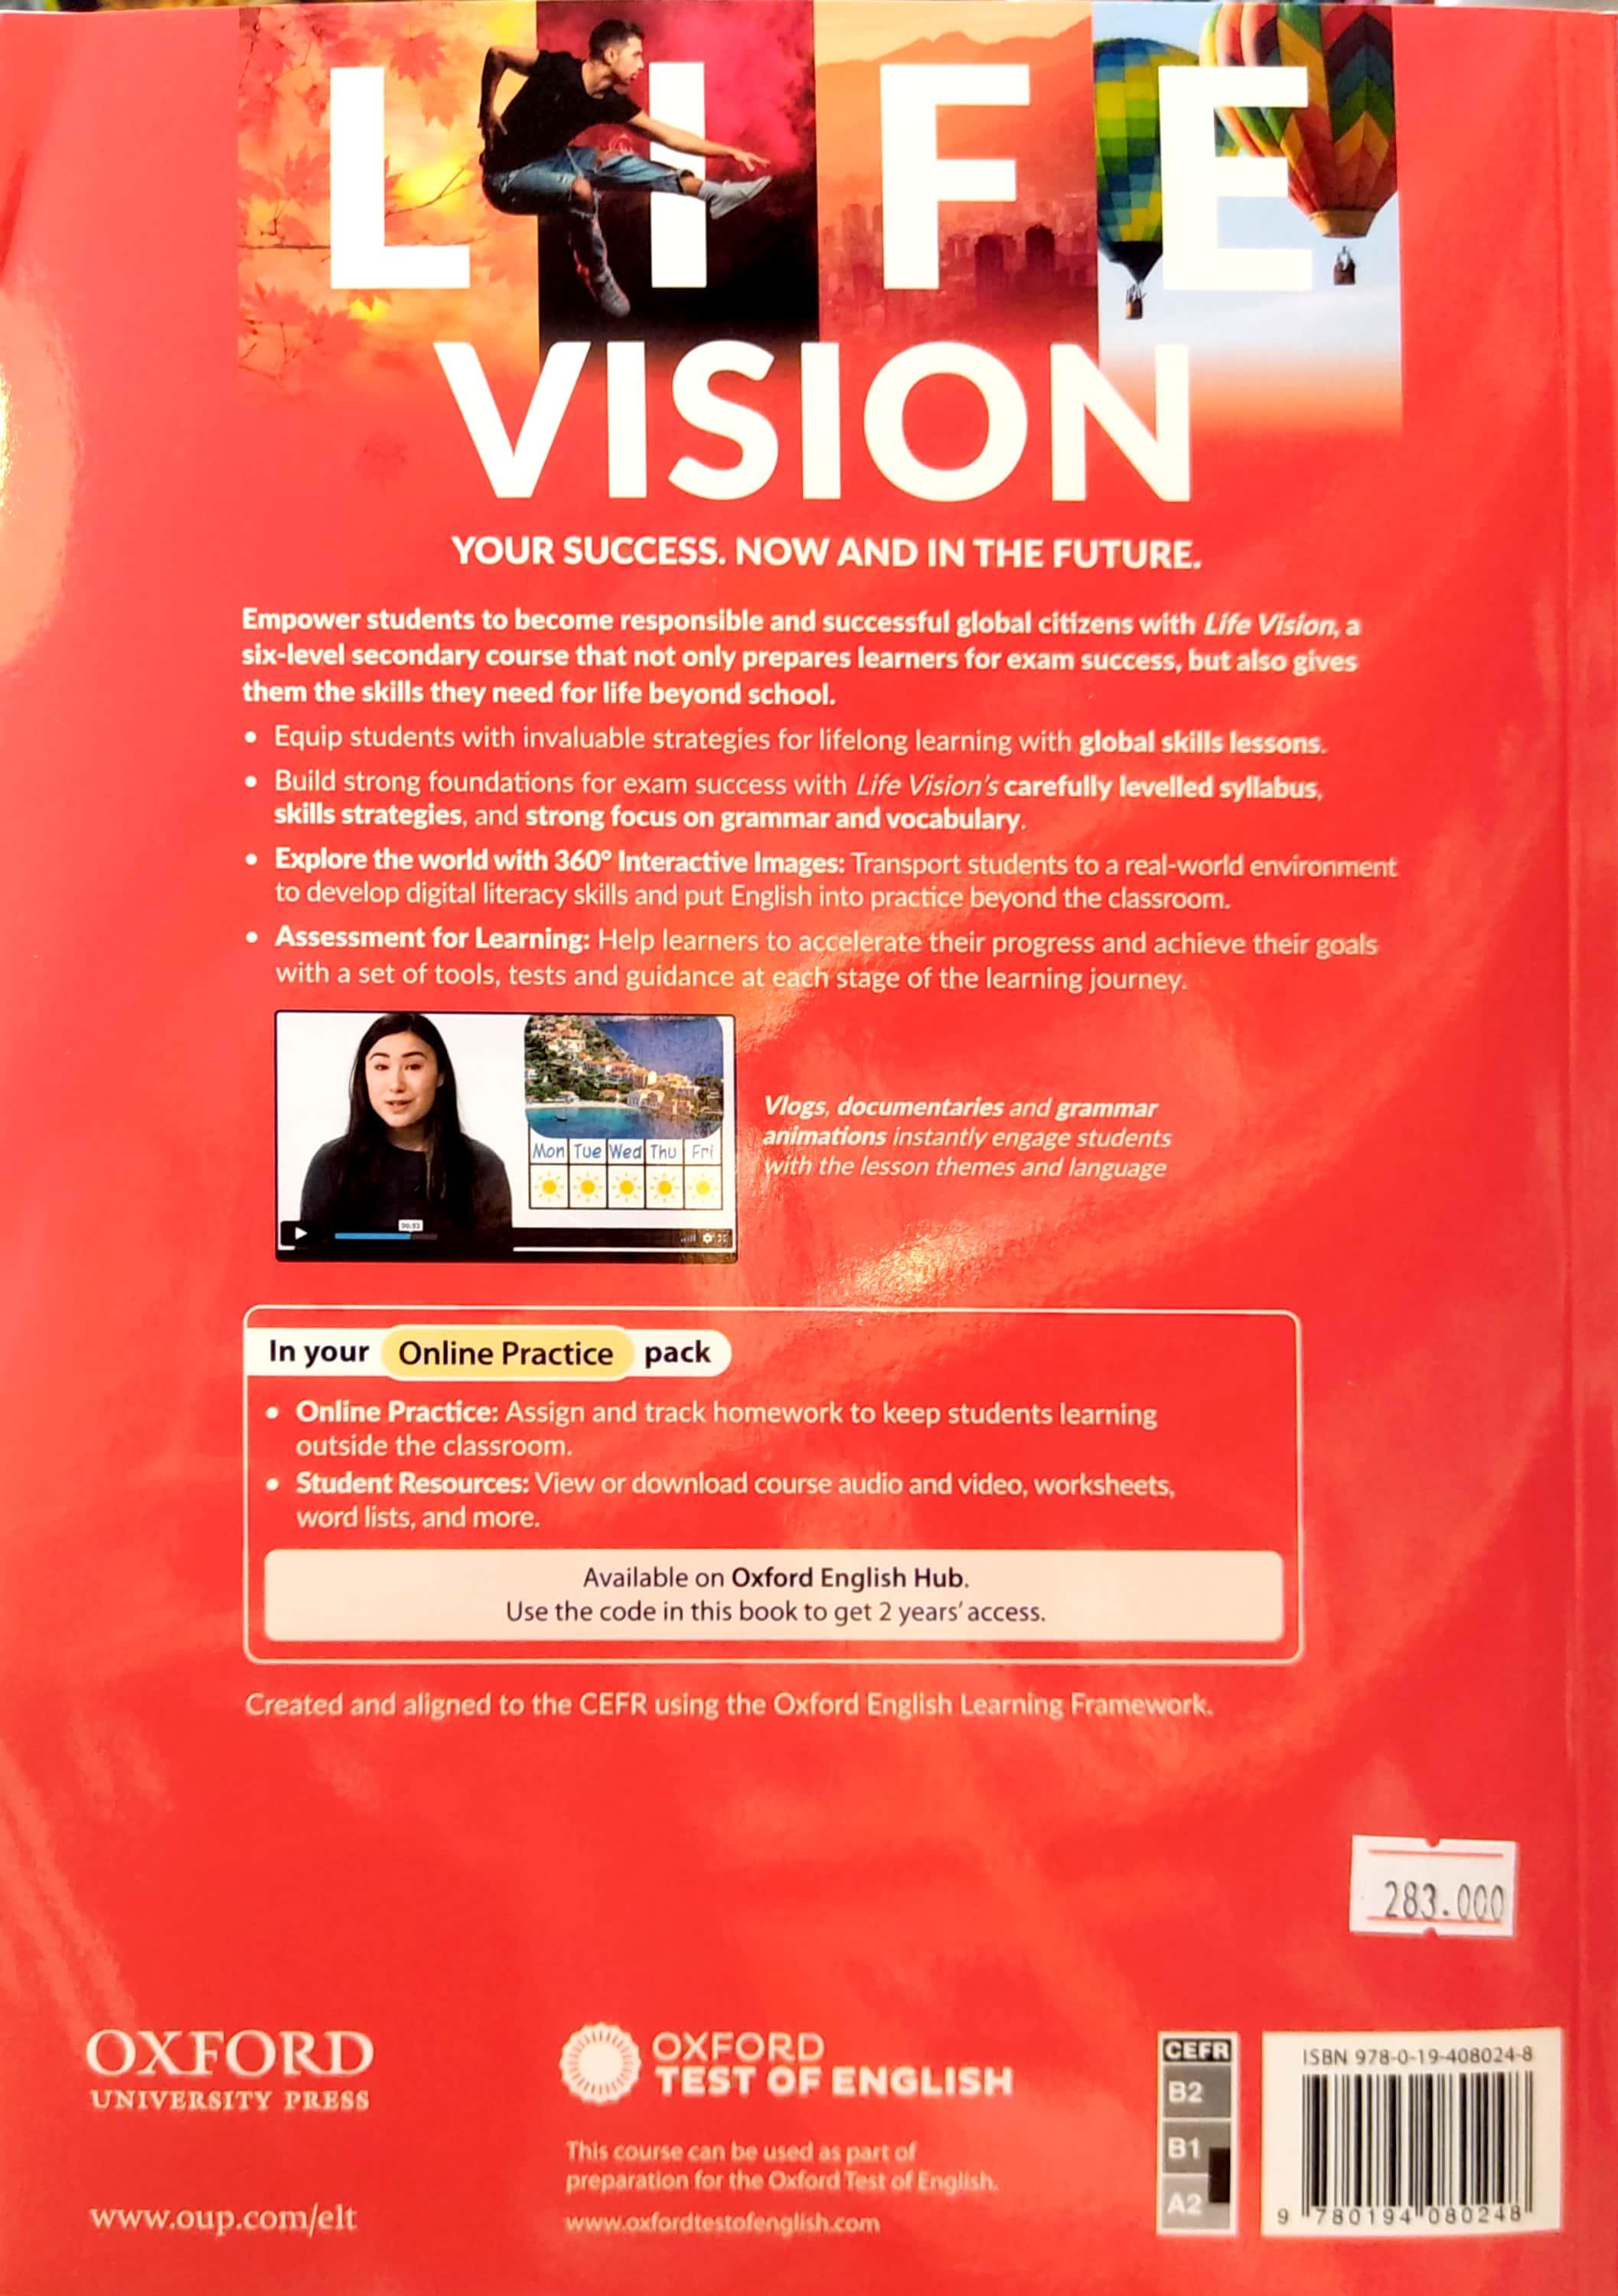 Life Vision Student Book With Online Practice A2/B1 Pre-Intermediate